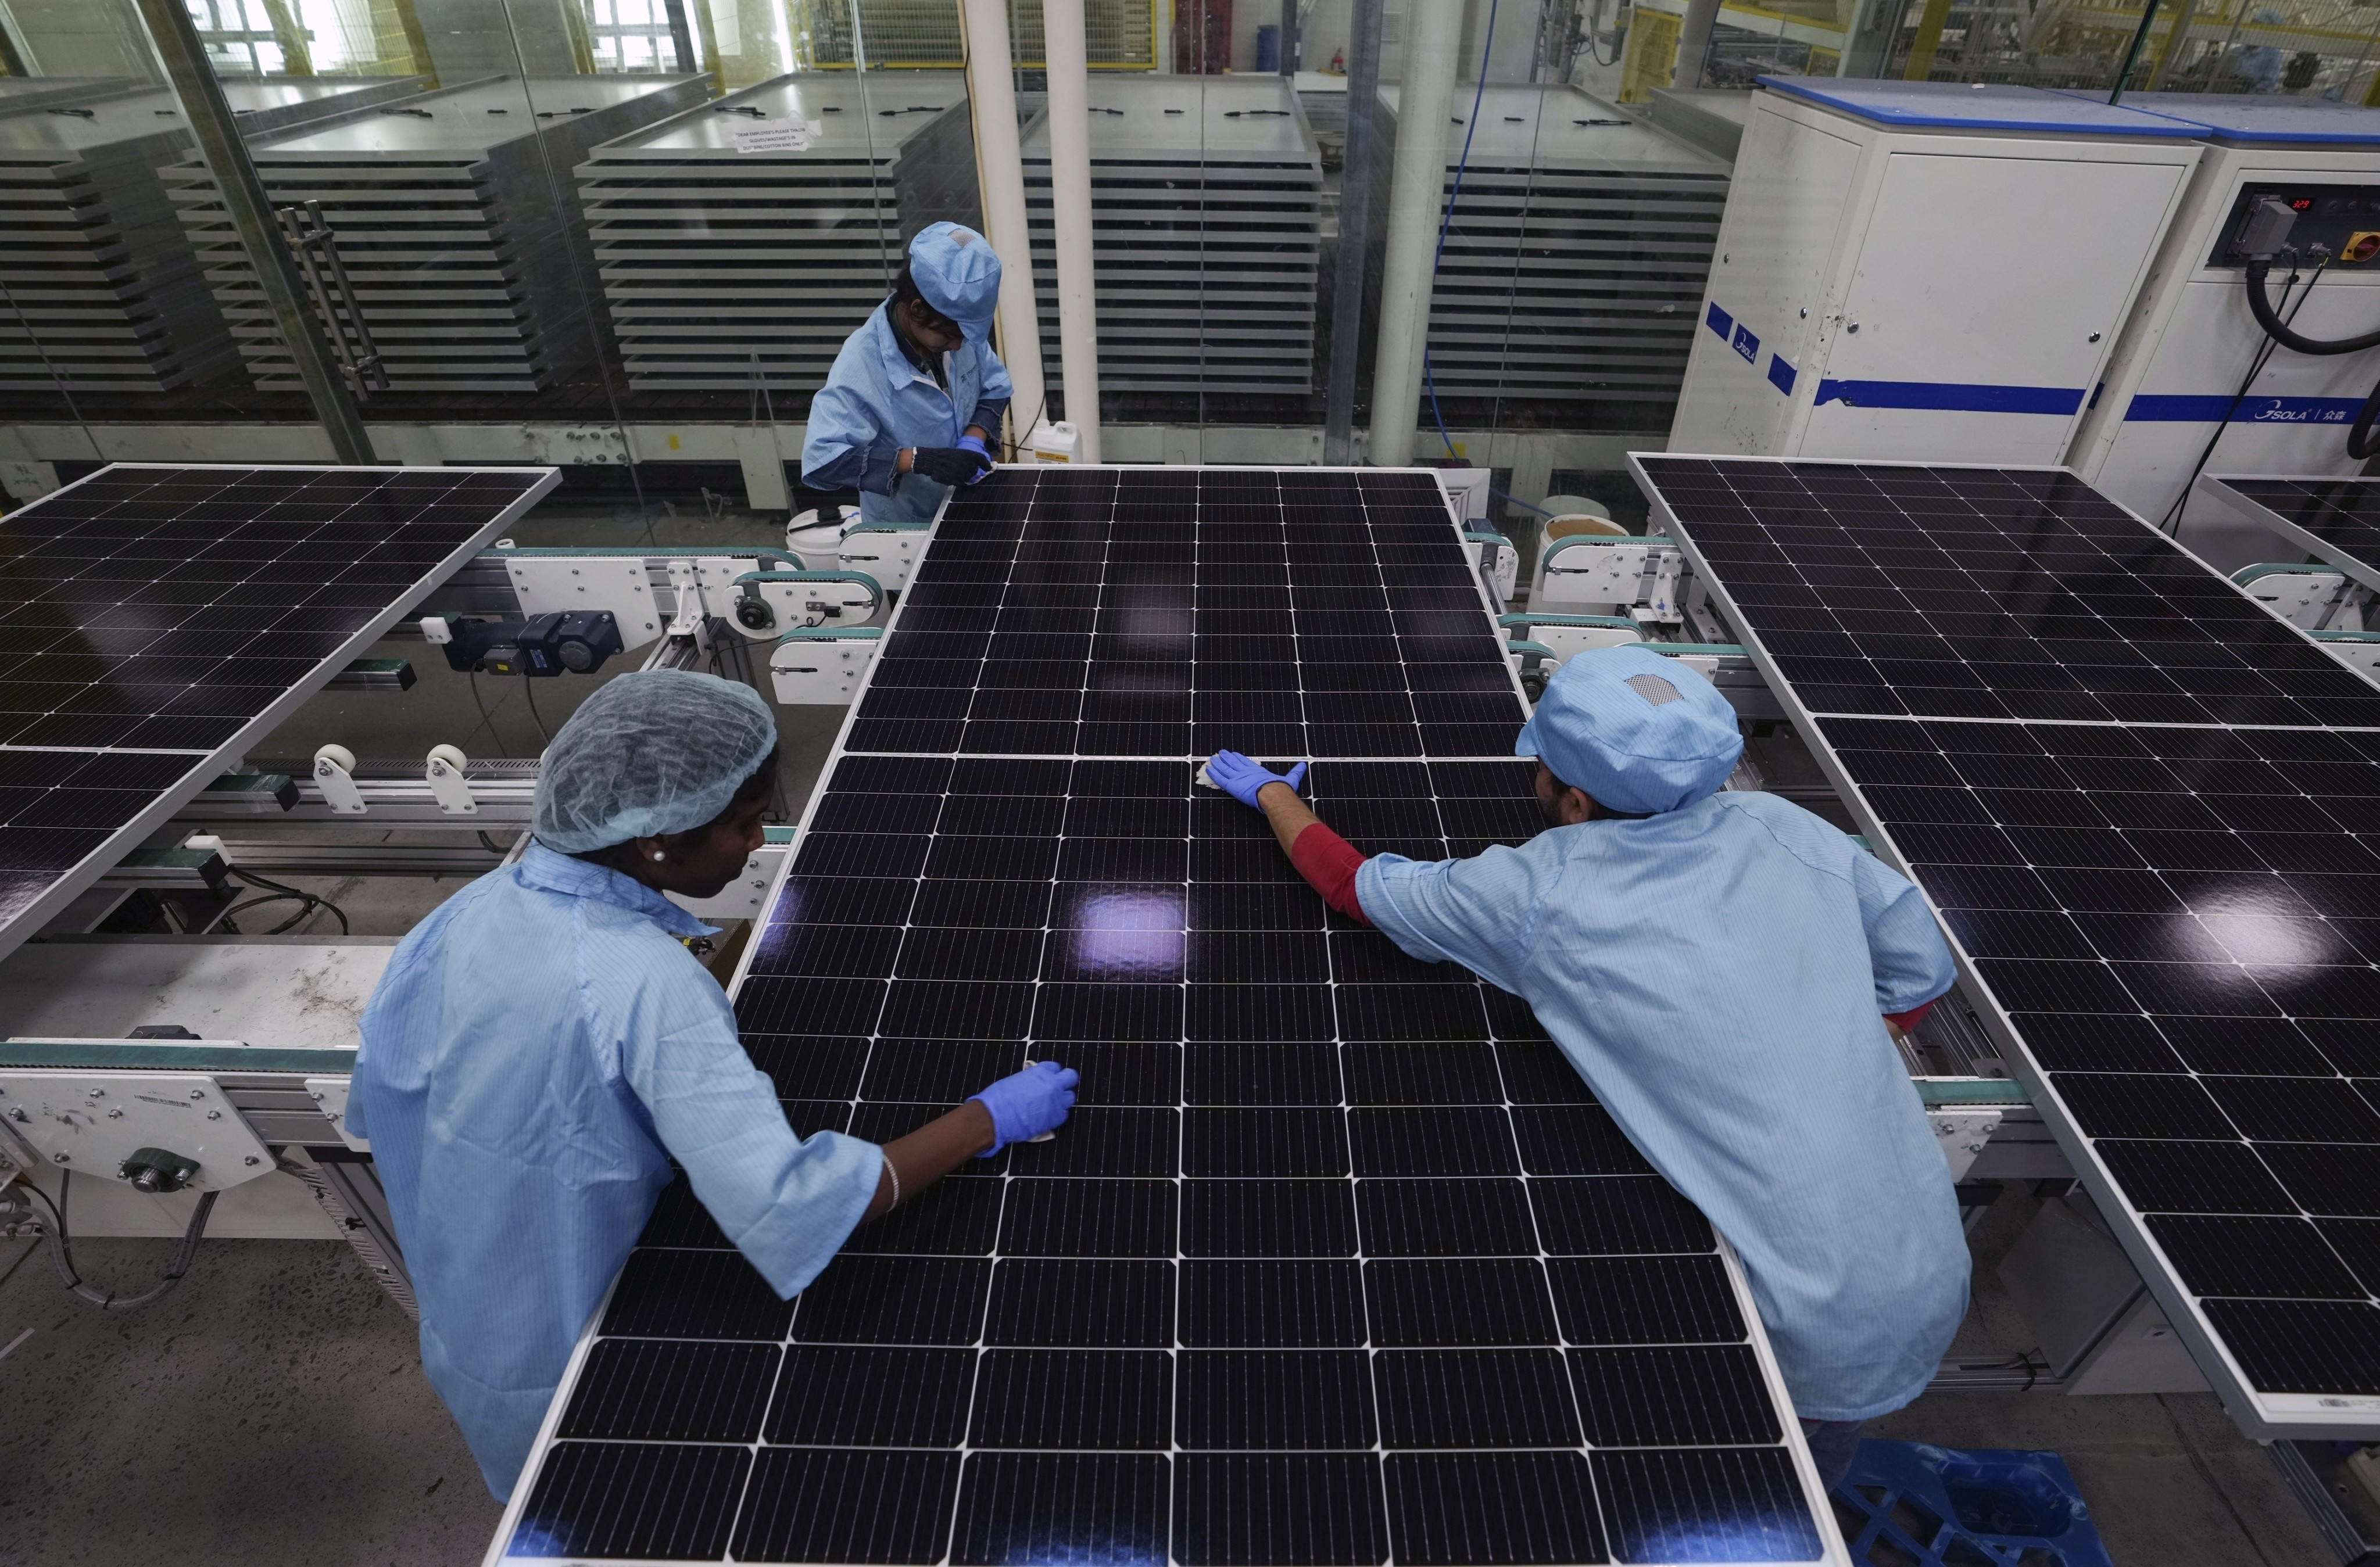 Machine operators clean solar panels at Premier Energies Solar on the outskirts of Hyderabad, India, on January 25. The recent trend of countries and firms trying to diversify their supply chains has been music to the ears of India, which has set itself ambitious targets for increasing manufacturing’s share of the country’s GDP. Photo: AP